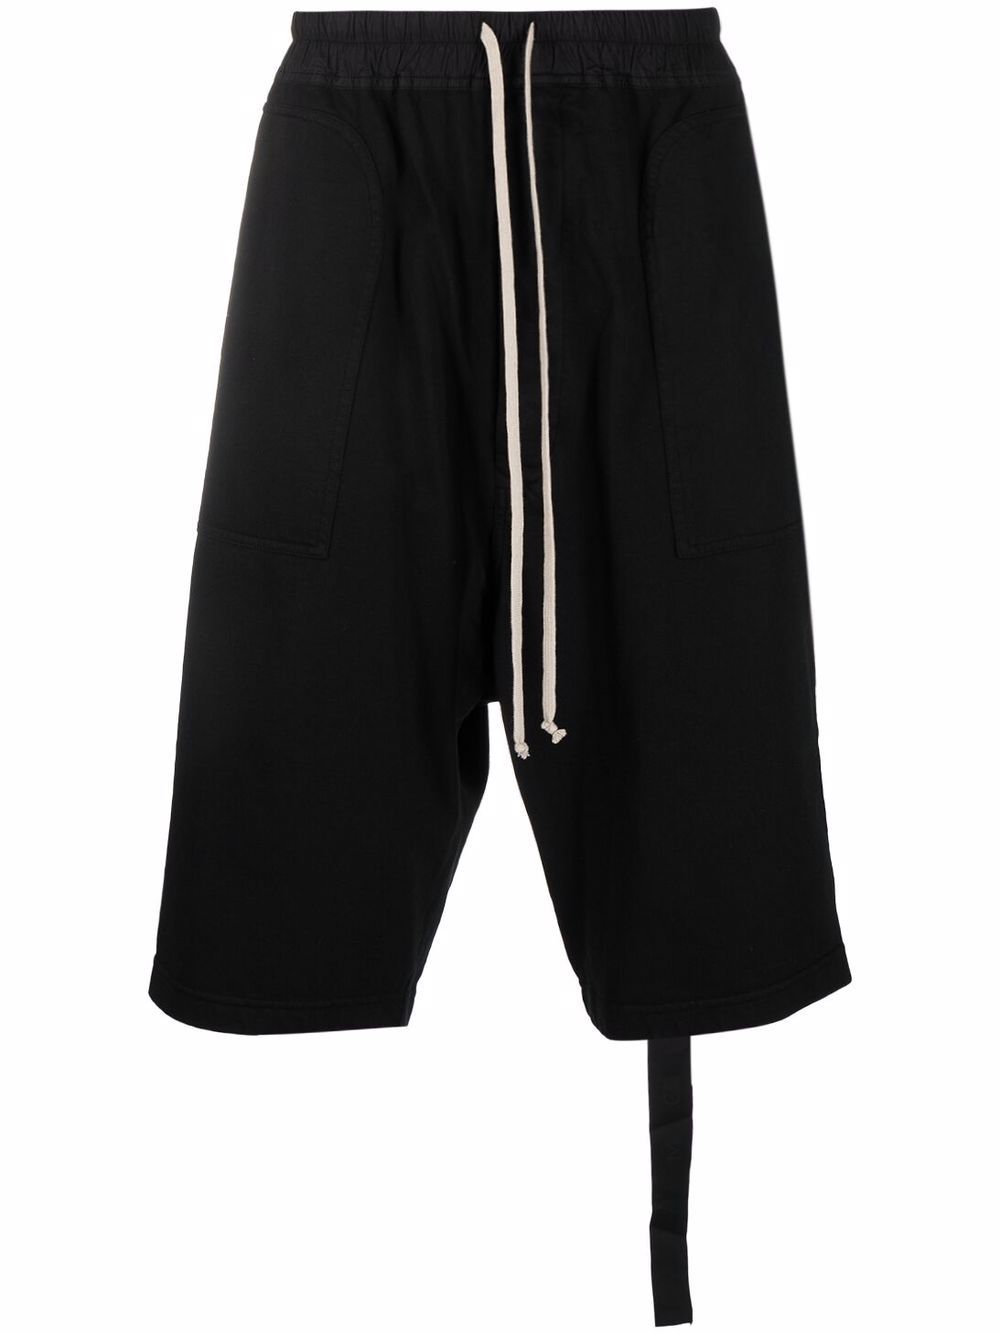 RICK OWENS DRKSHDW DROPPED-CROTCH COTTON TRACK SHORTS